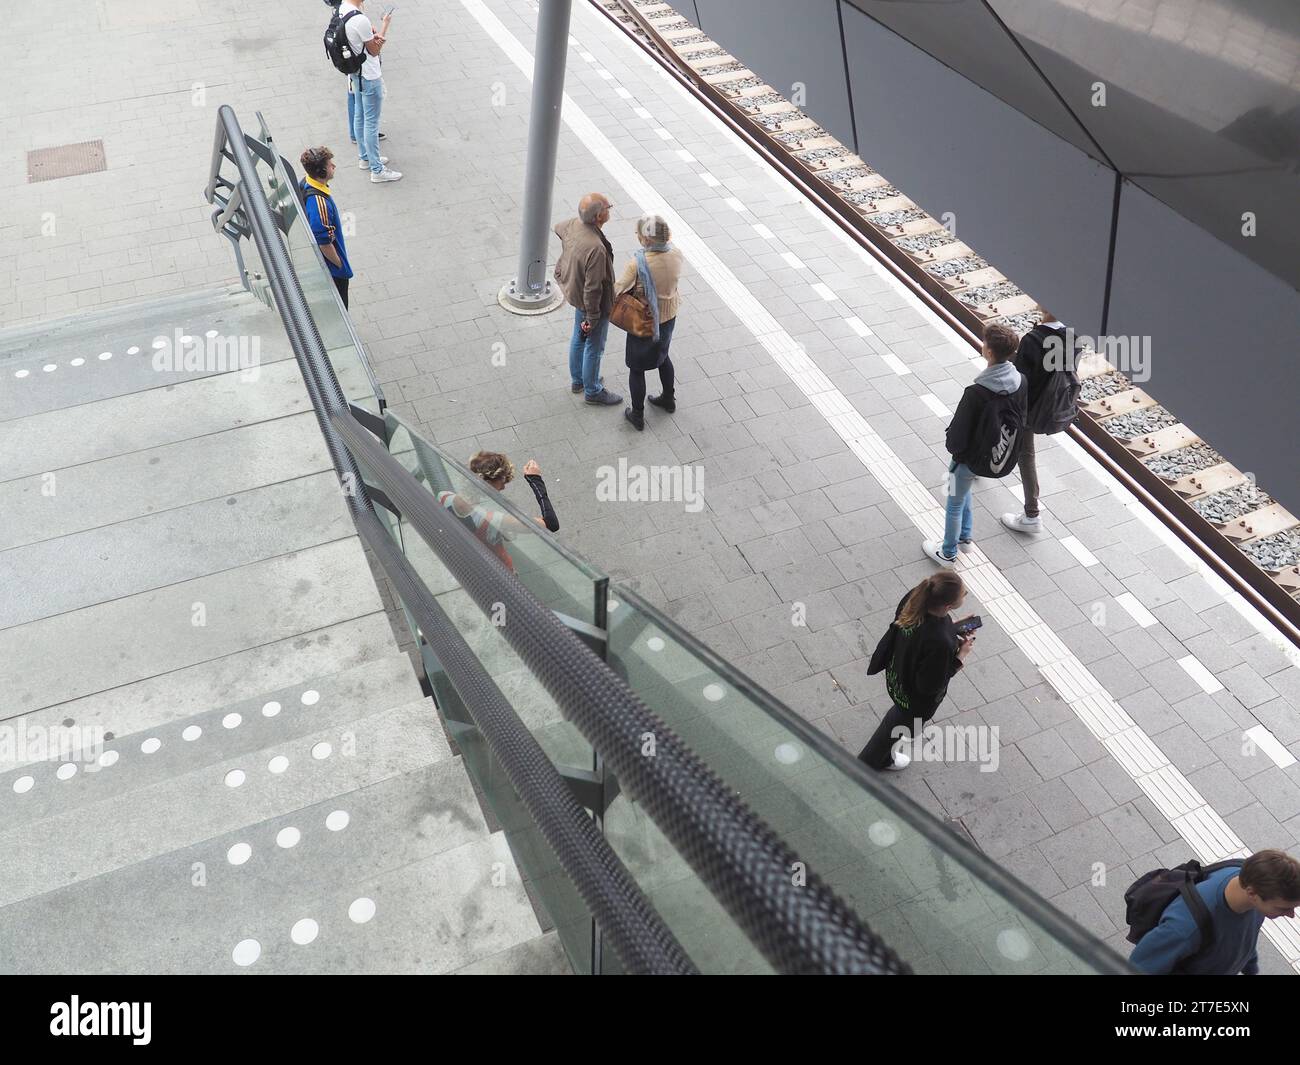 View from the staircase down to railway track with people waiting, older couple, girl, boy, headphones, handrail, safety strip, Utrecht Centraal Stock Photo